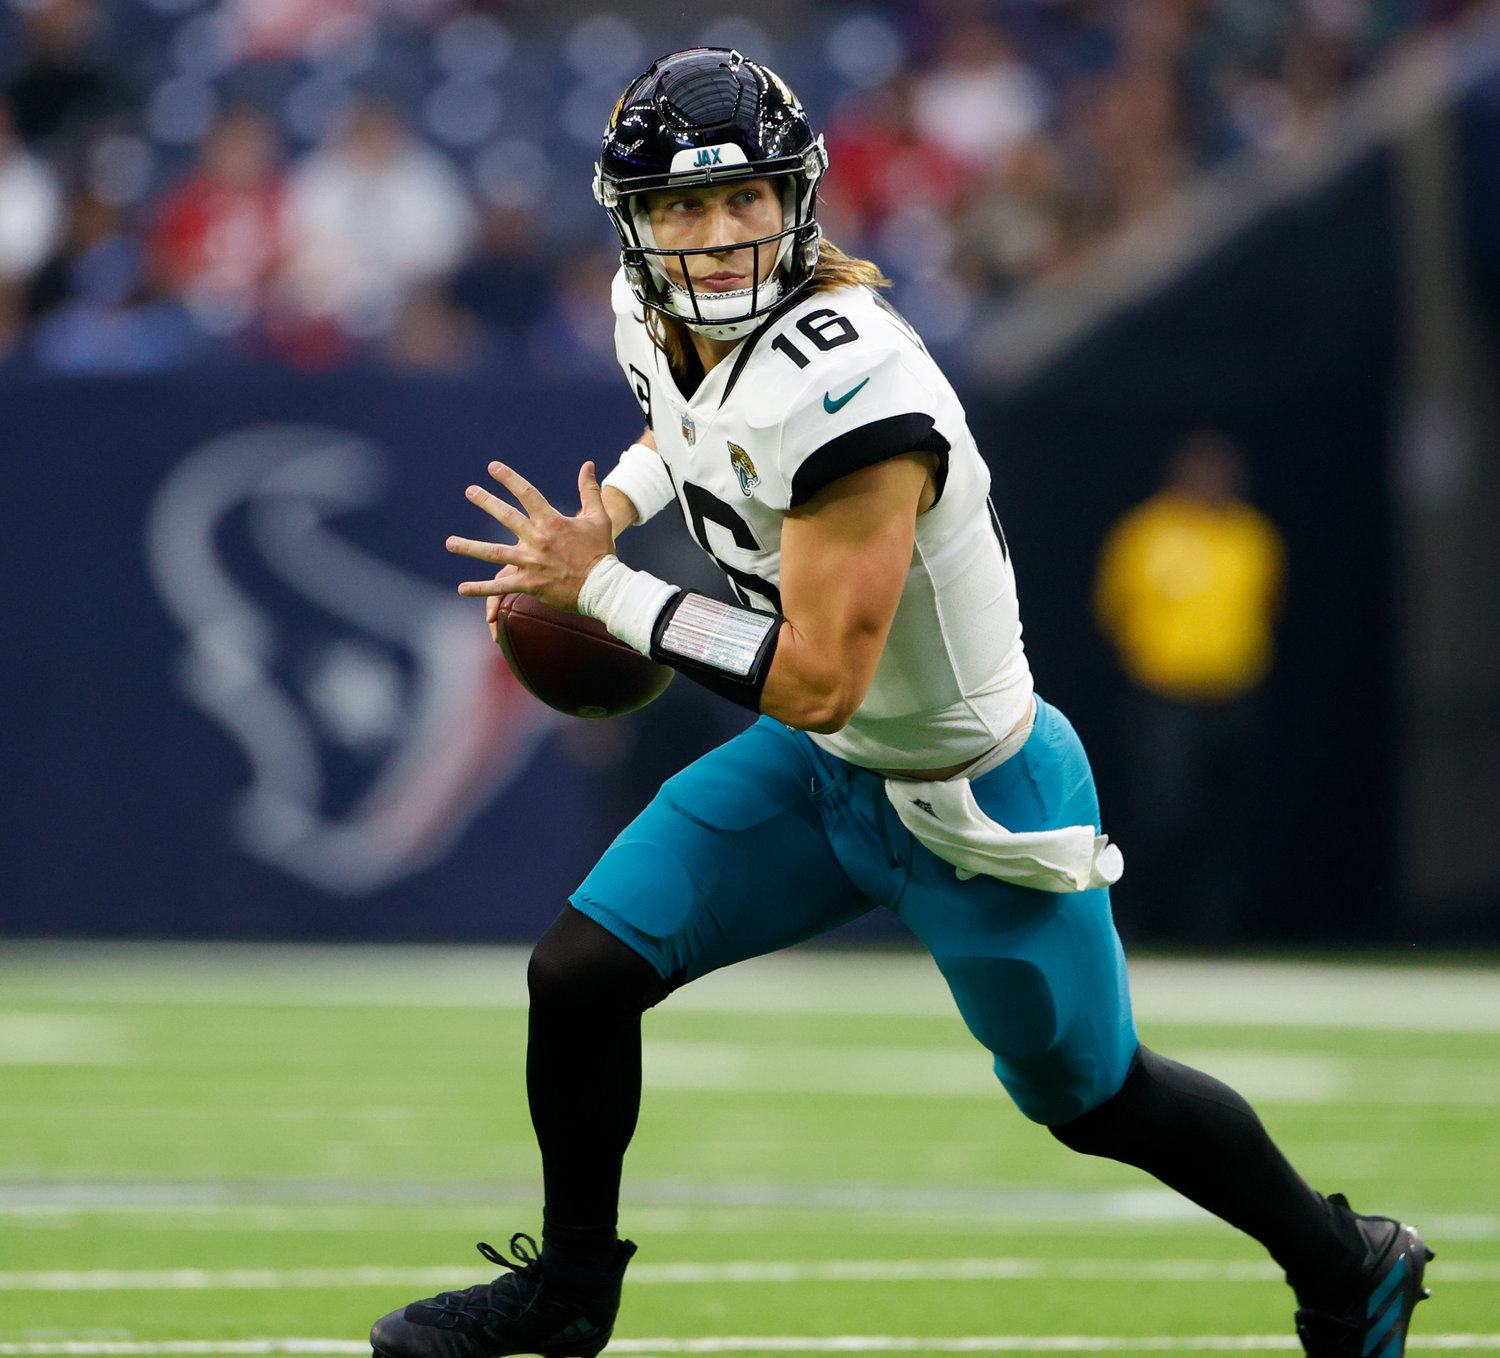 Jaguars quarterback Trevor Lawrence (16) rolls out and looks downfield for a receiver during an NFL game between the Houston Texans and the Jacksonville Jaguars on Jan. 1, 2023 in Houston. The Jaguars won, 31-3.